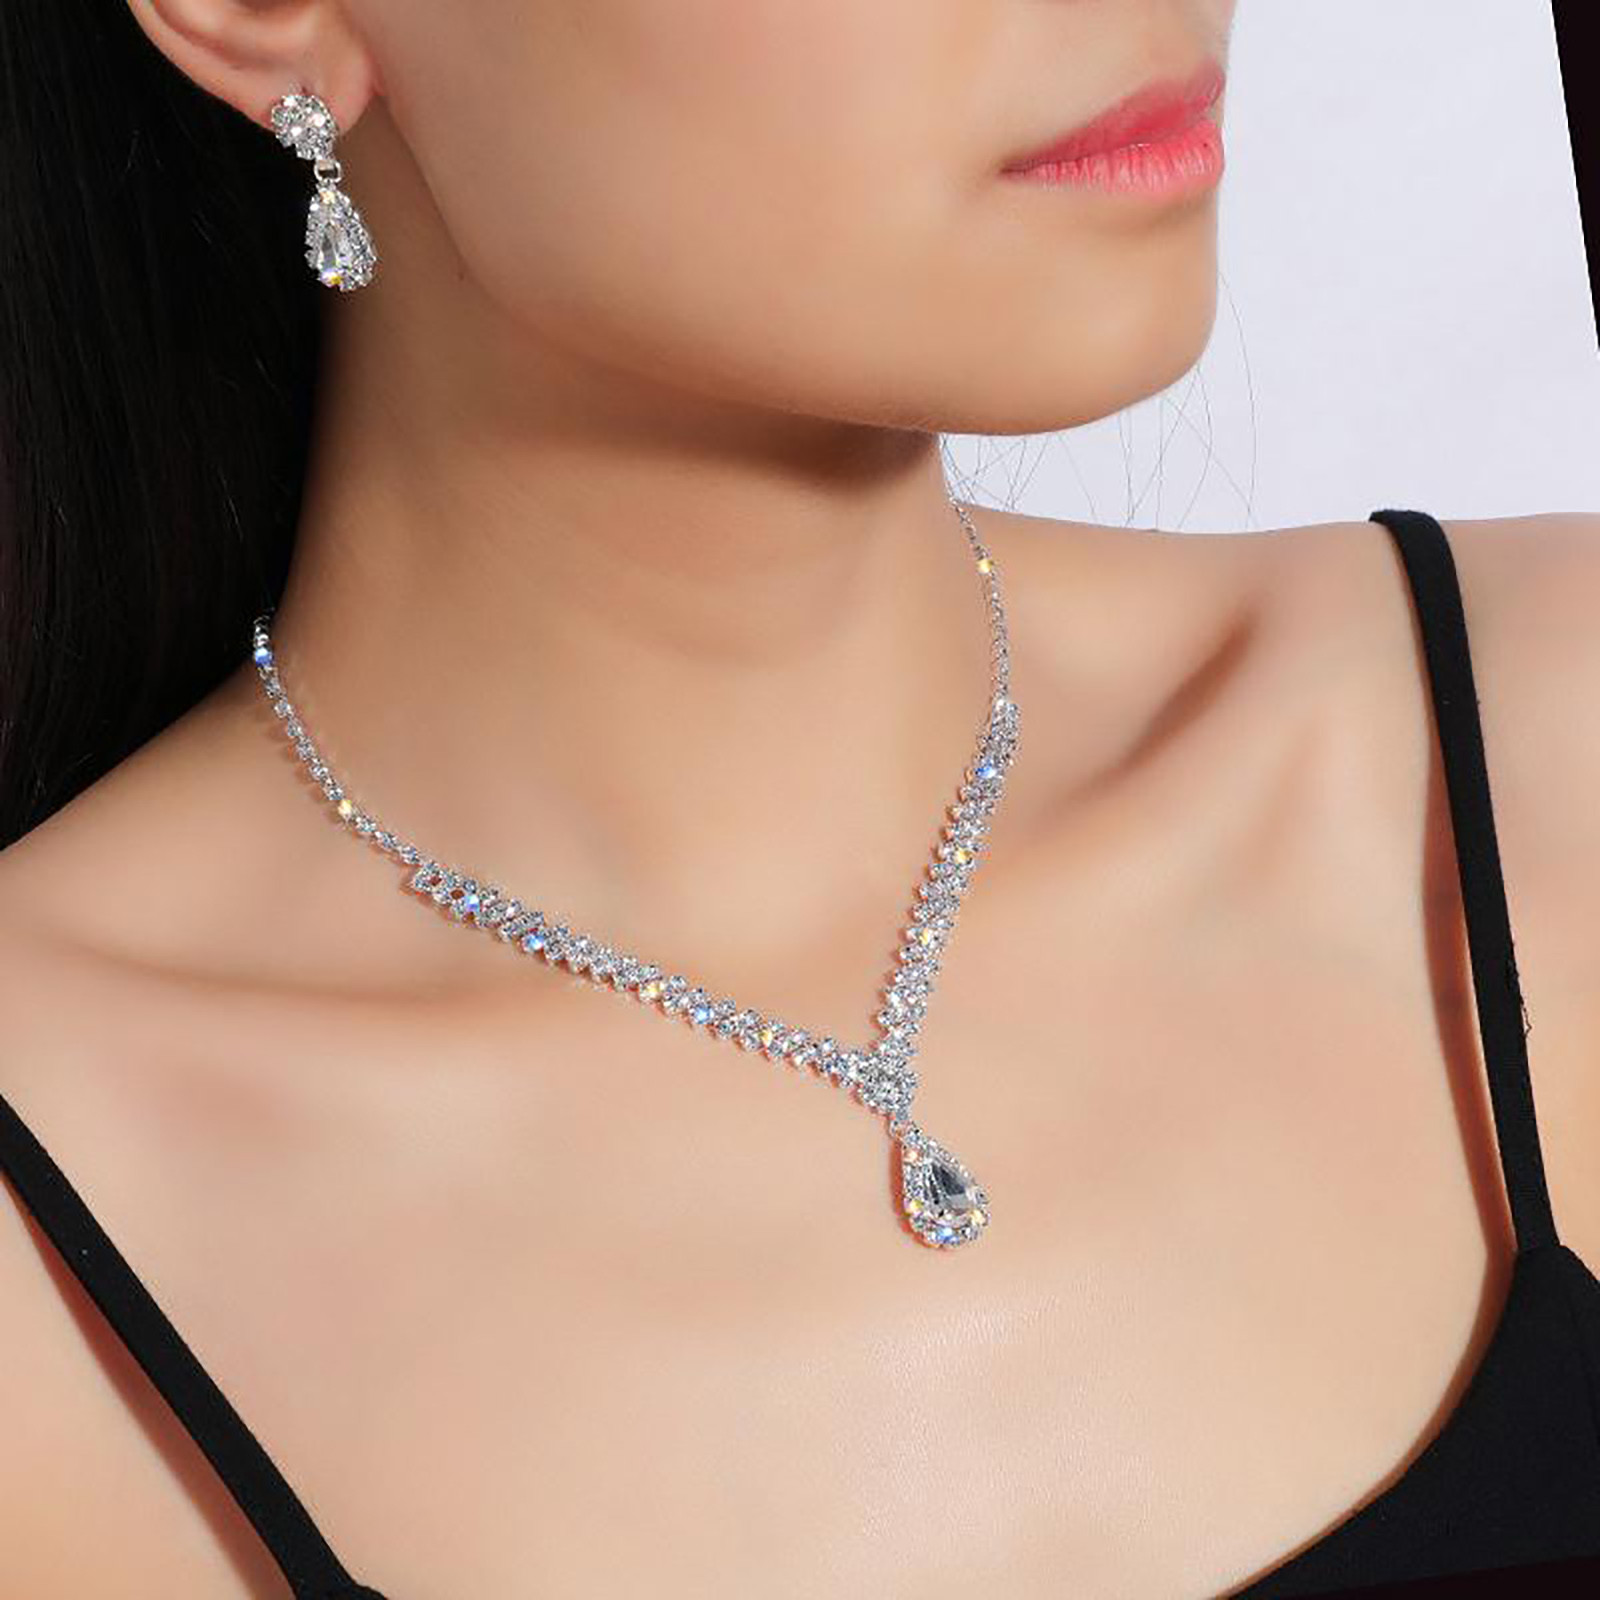 TIHLMK Deals Clearance Initial Necklaces for Women Exquisite Rhinestone Chain Necklace Set Diamond Necklace and Earrings Two-piece Wedding Bridal Jewelry Set - image 1 of 5